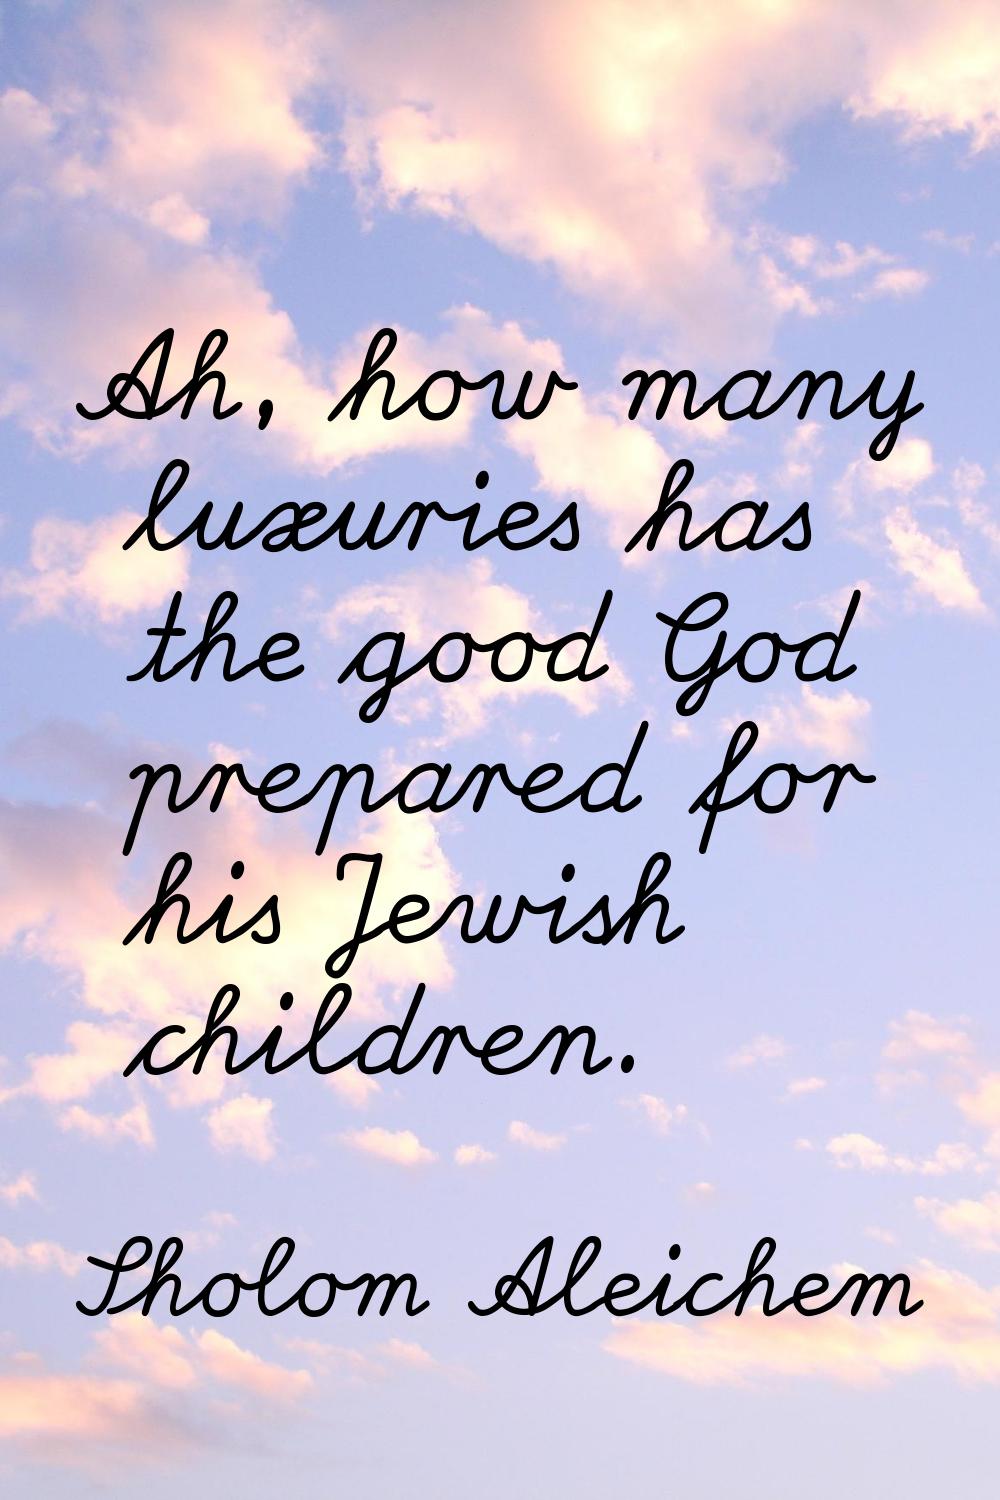 Ah, how many luxuries has the good God prepared for his Jewish children.